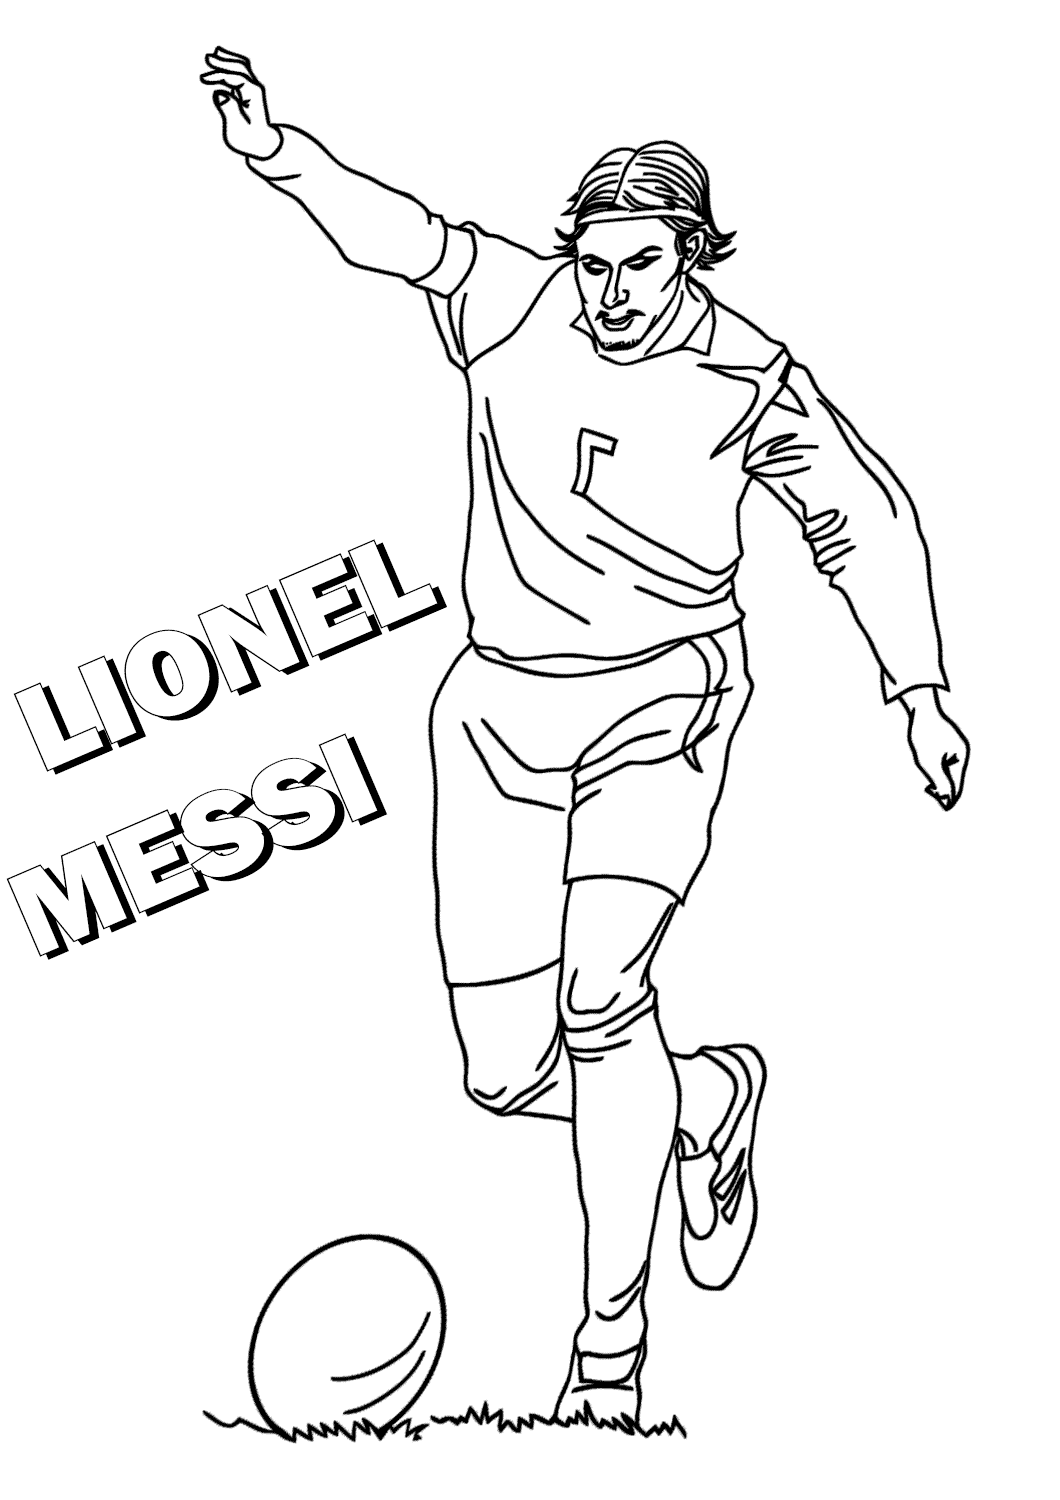 Lionel Messi coloring pages | Coloring pages to download and print